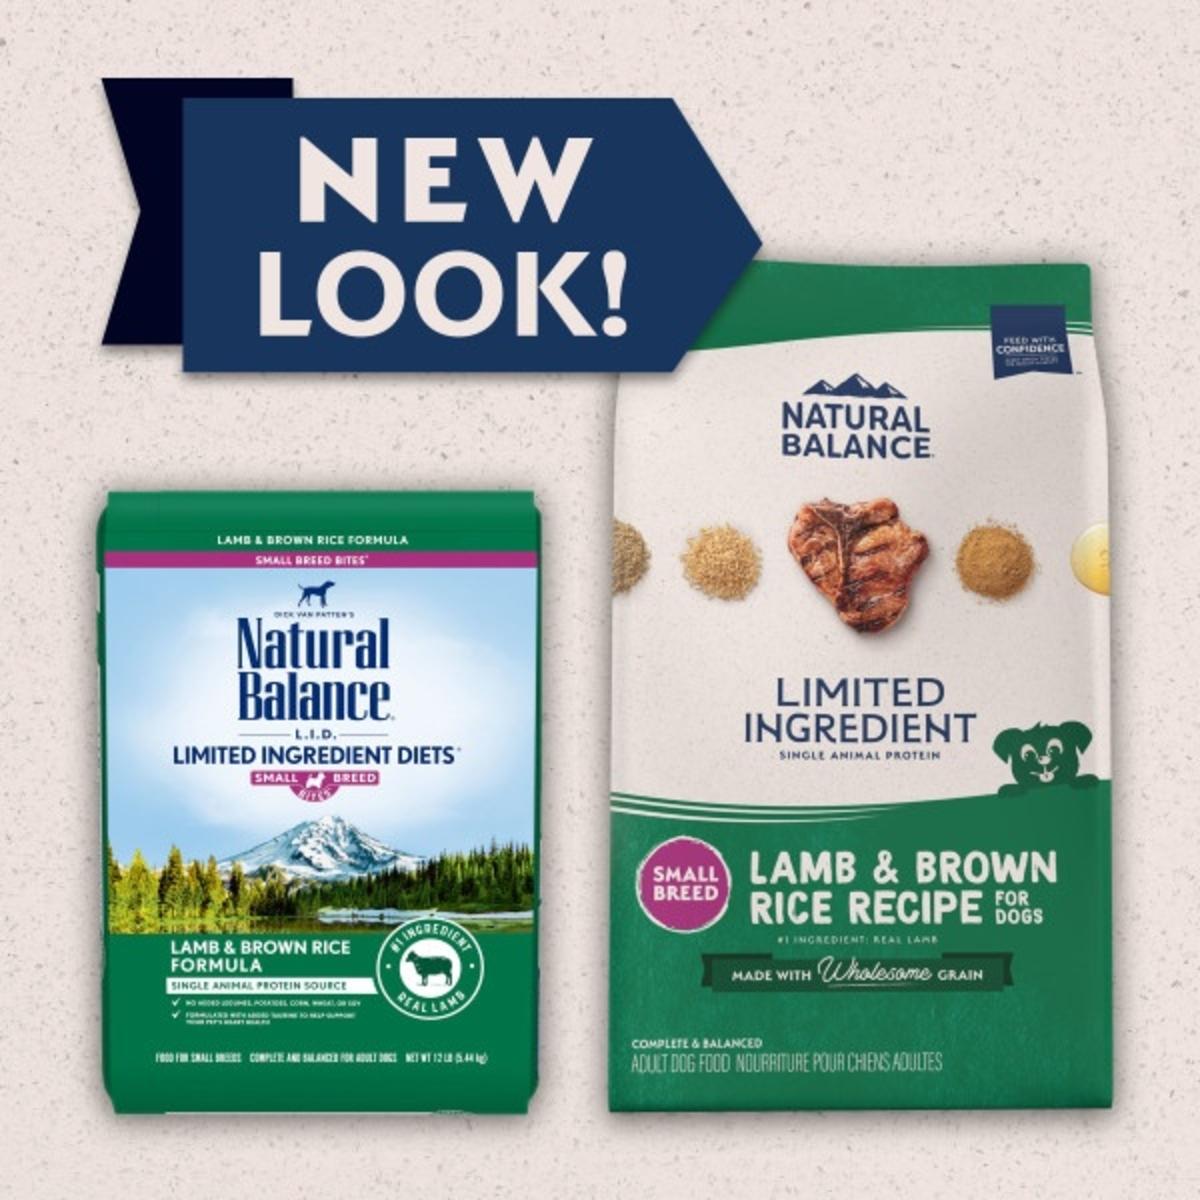 Natural Balance® Limited Ingredient Lamb & Brown Rice Small Breed Recipe New Look